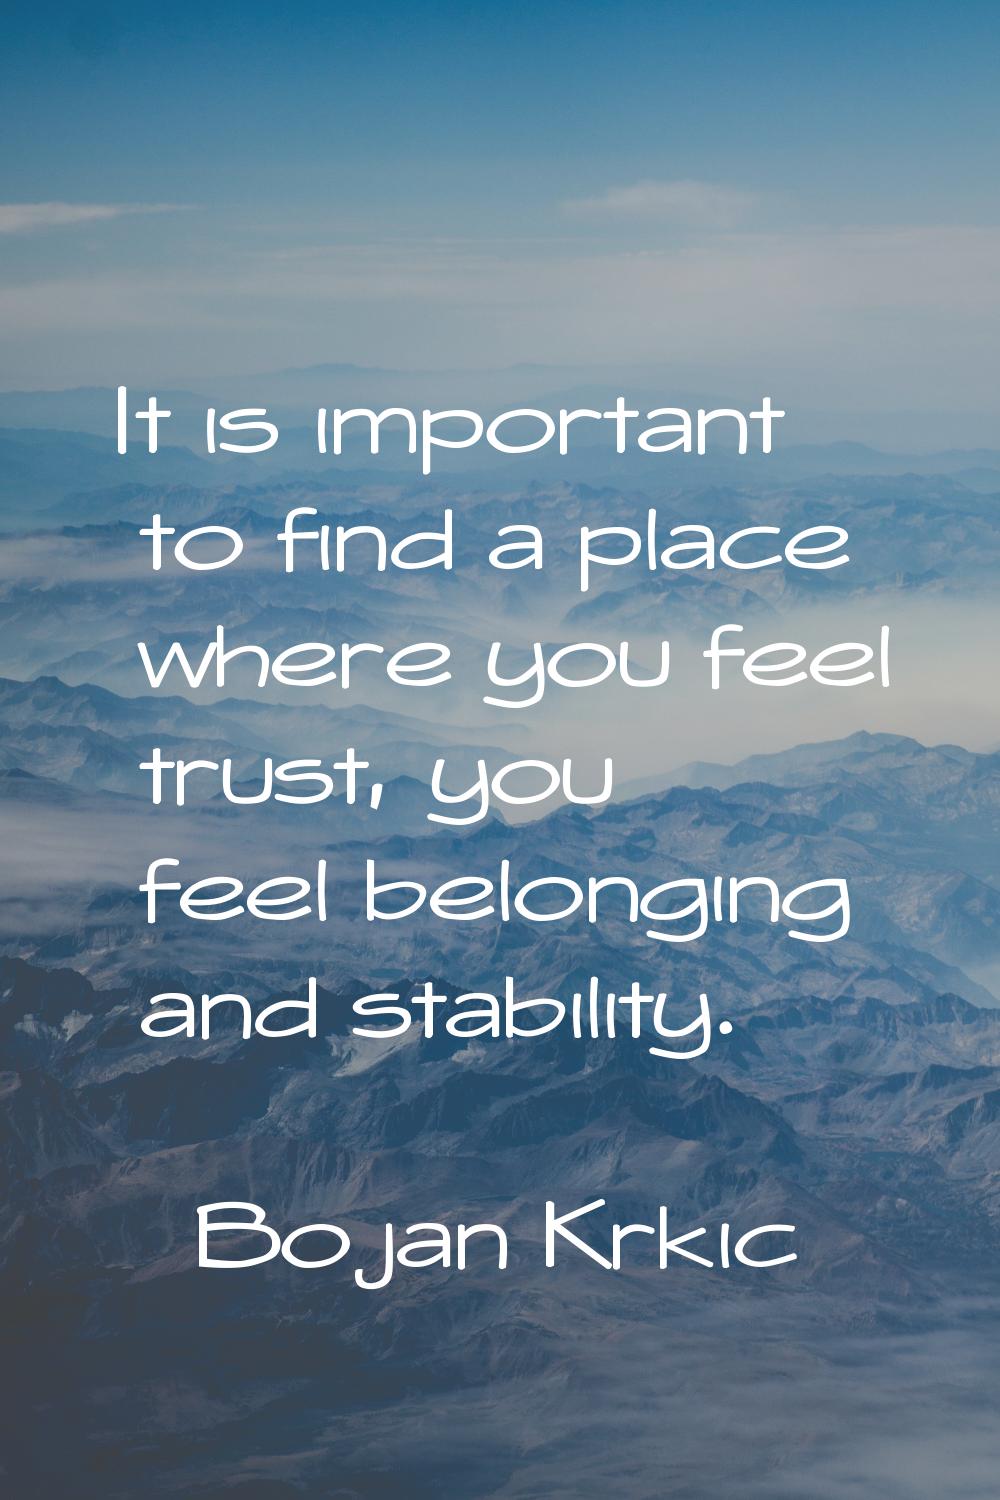 It is important to find a place where you feel trust, you feel belonging and stability.